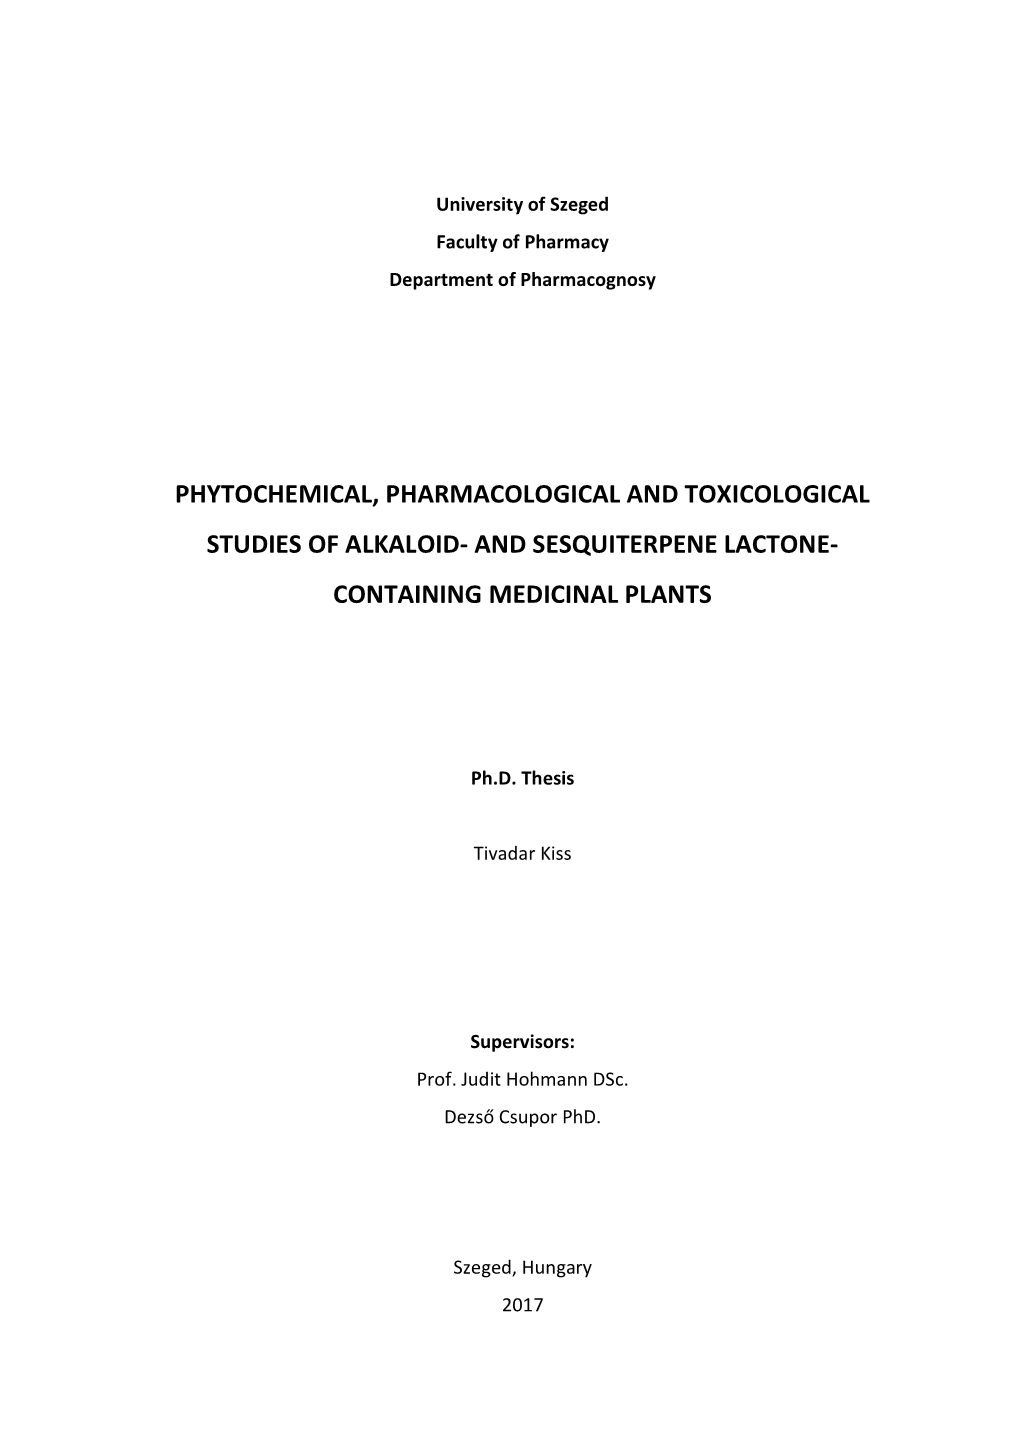 Phytochemical, Pharmacological and Toxicological Studies of Alkaloid- and Sesquiterpene Lactone- Containing Medicinal Plants